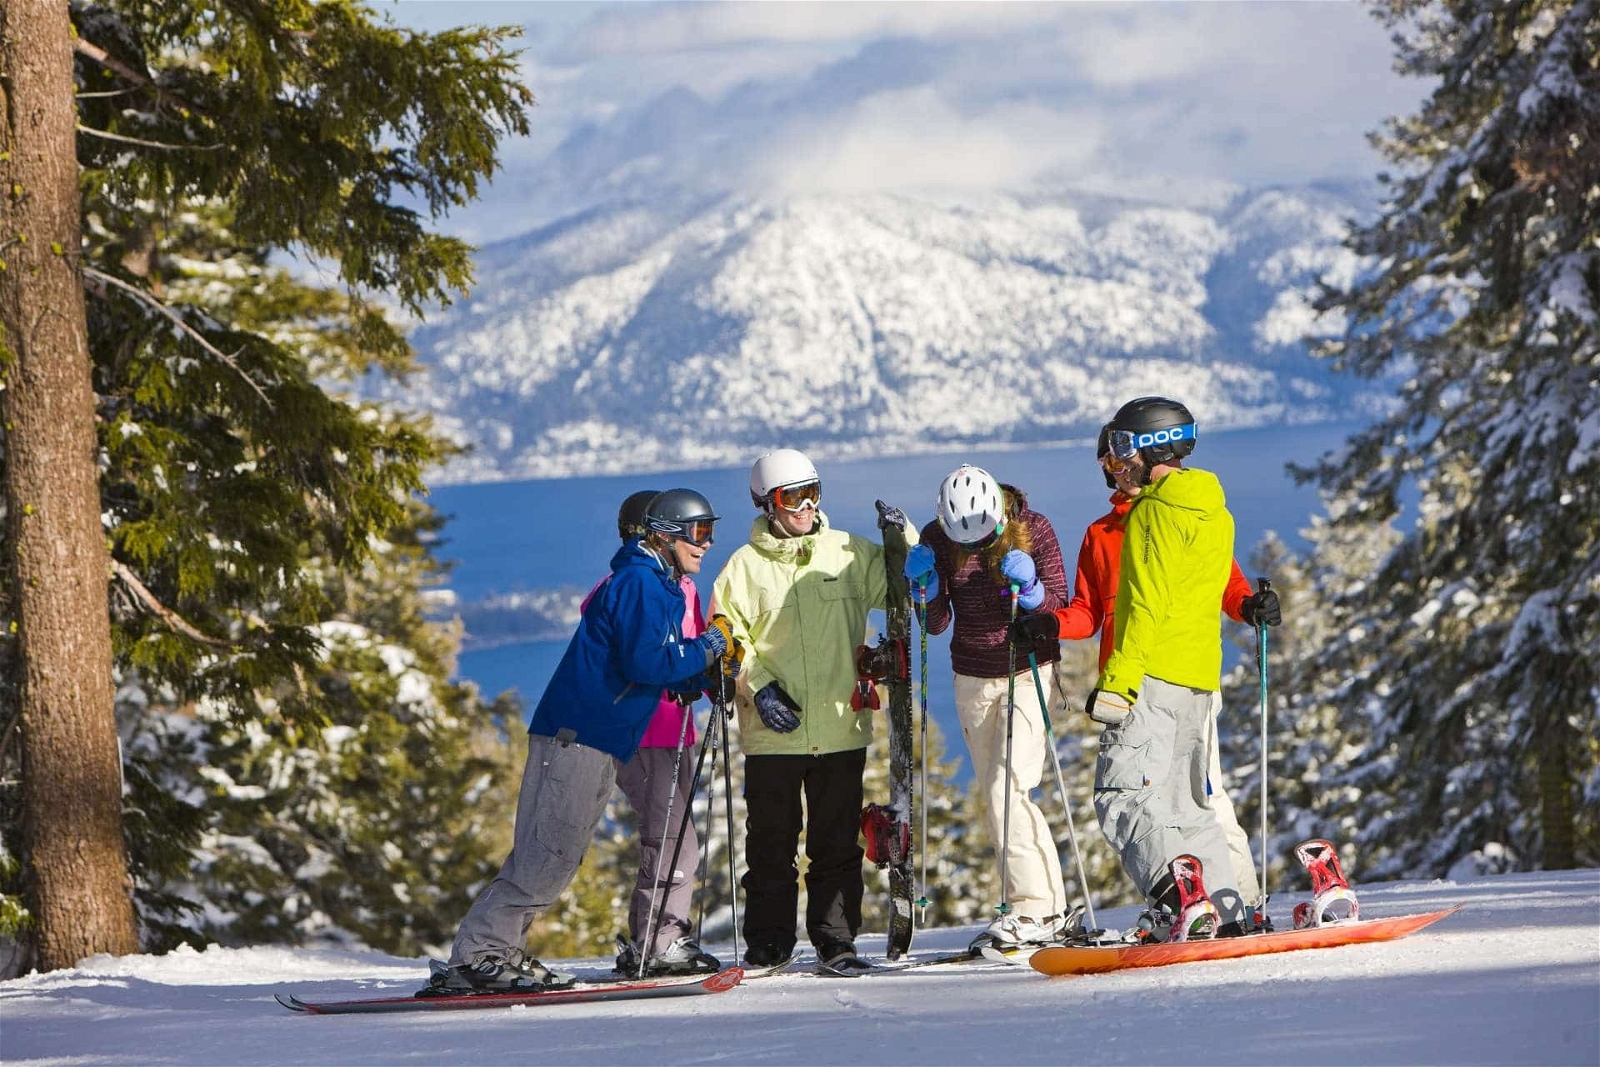 Ski Vacation Package - Stay Longer, Save More! 10-15% off 4+ night stays. Book by 2/15/24.